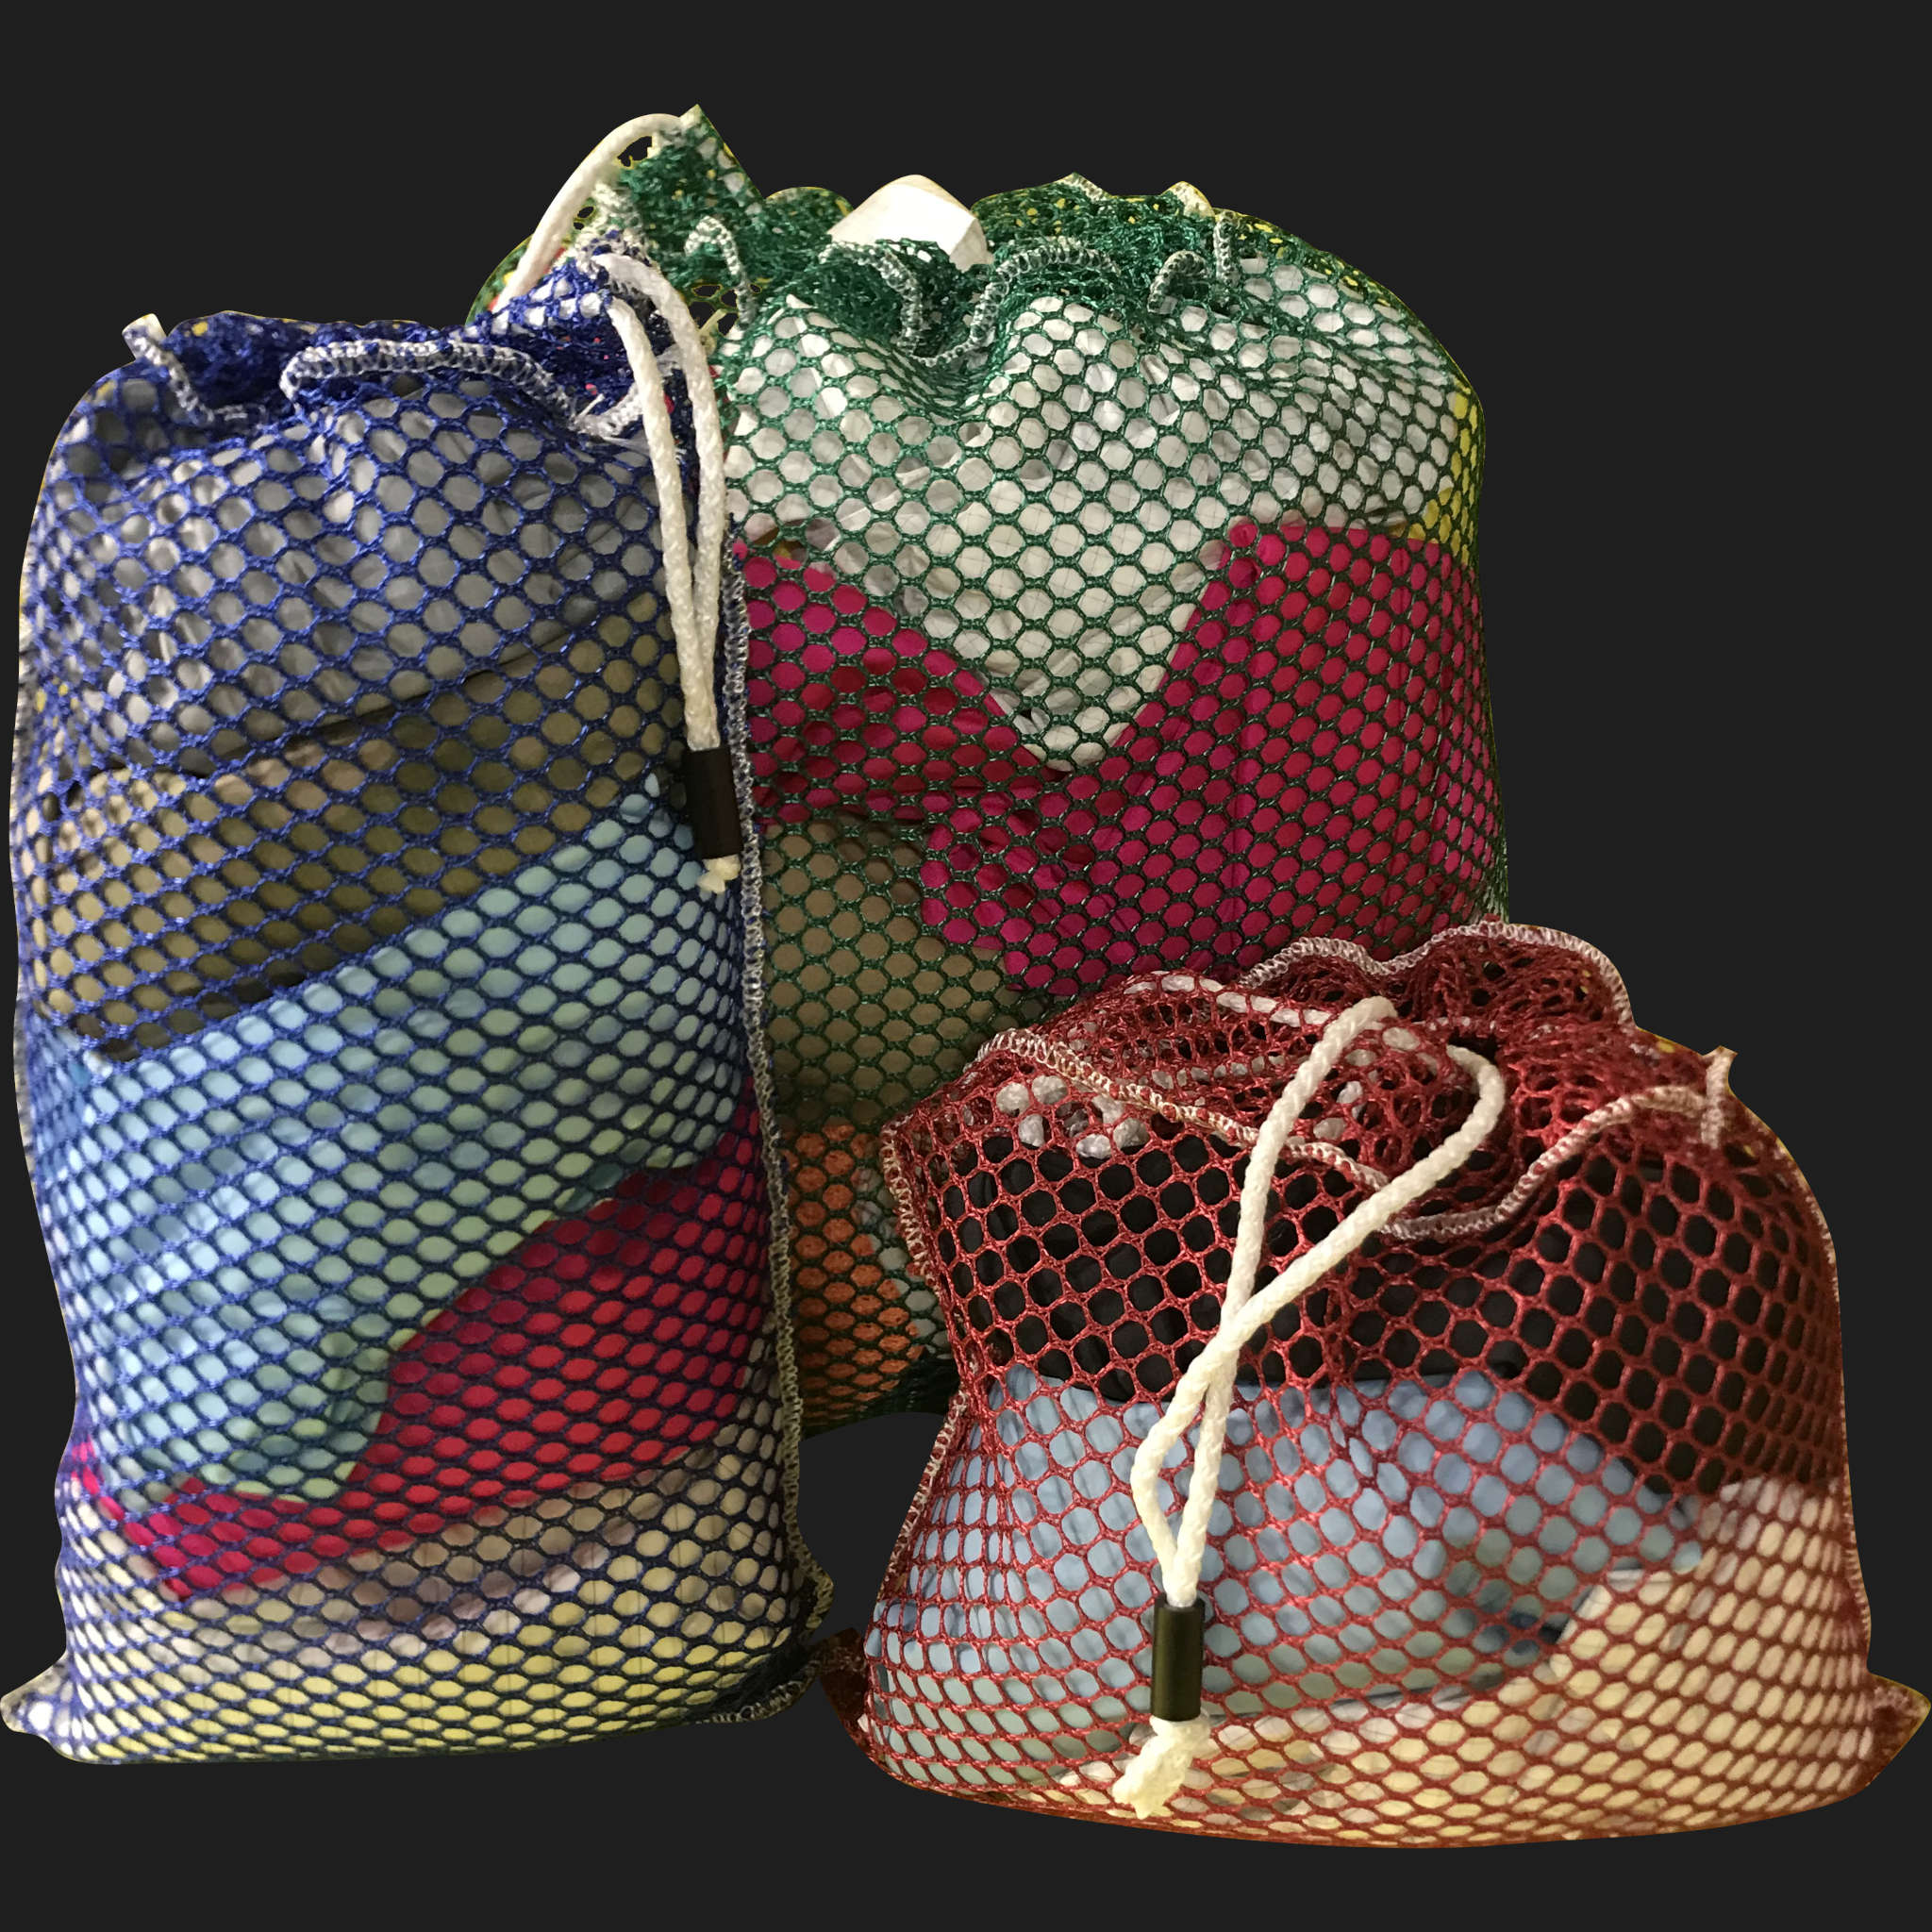 52" x 62" Customized Mesh-Net-Laundry Bags Heavy Duty with Cord and barrellock closure